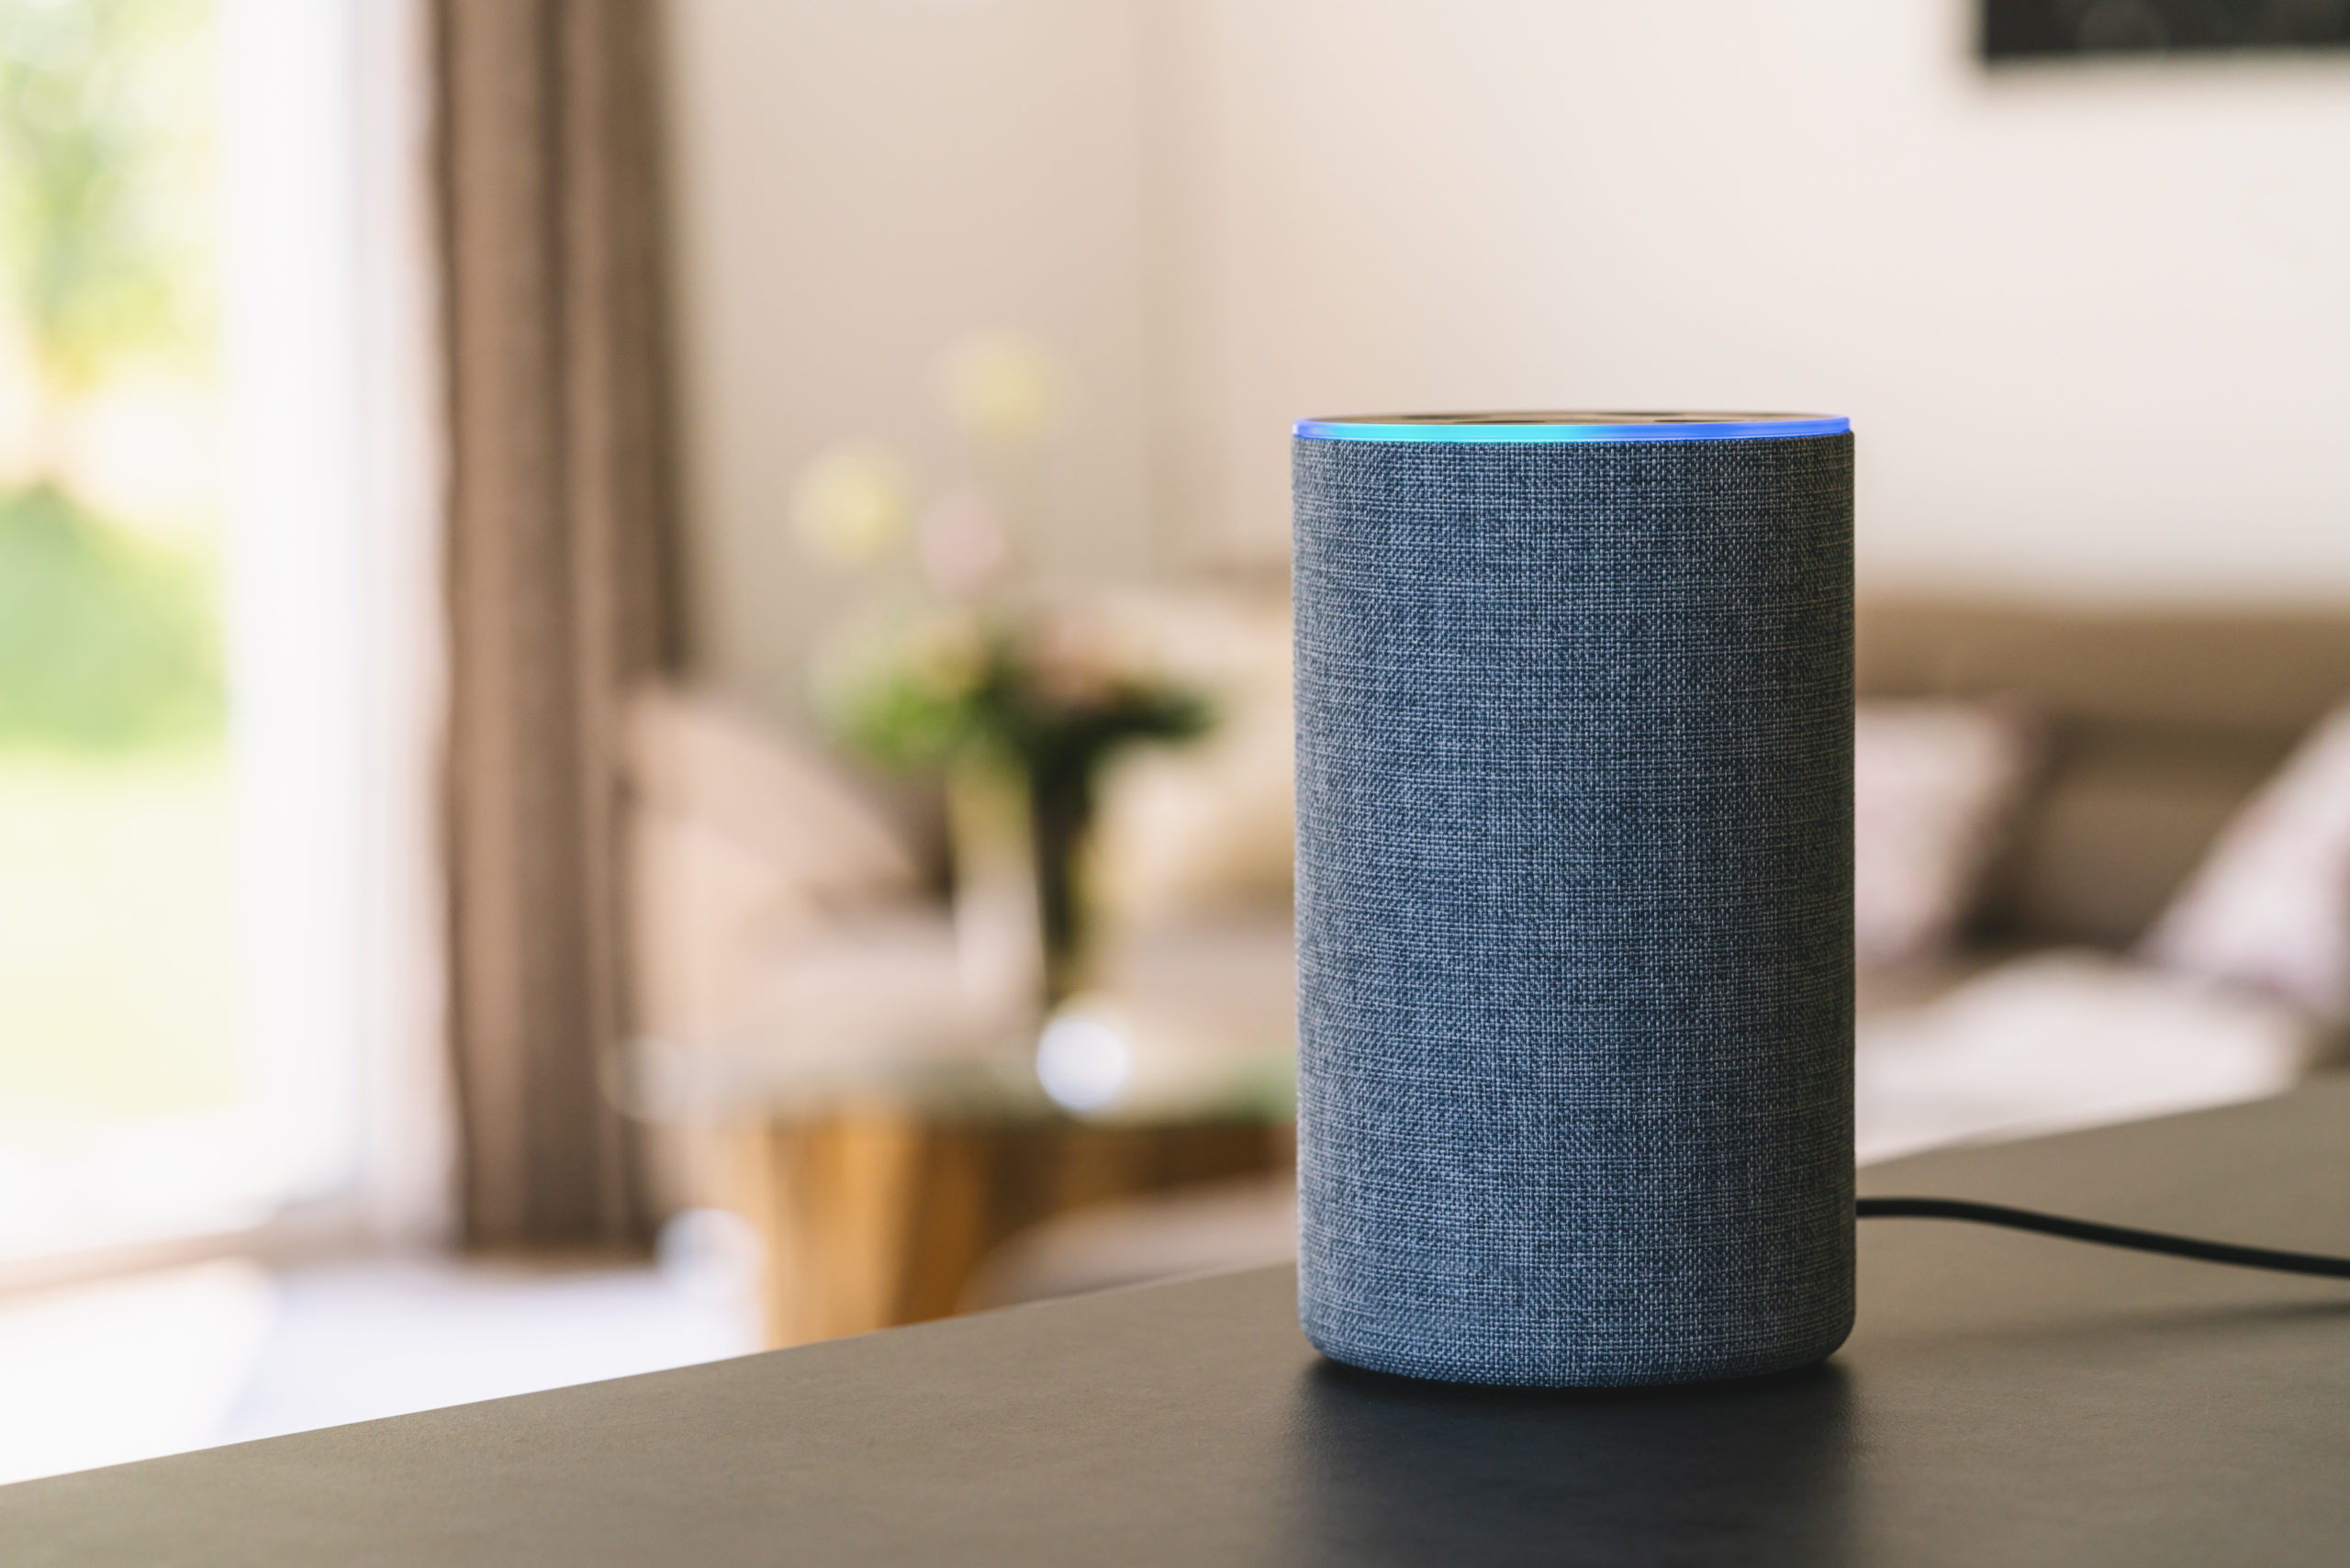 Amazon Hangs Up The Echo Connect This Month, Ending Its Ability to Make Calls